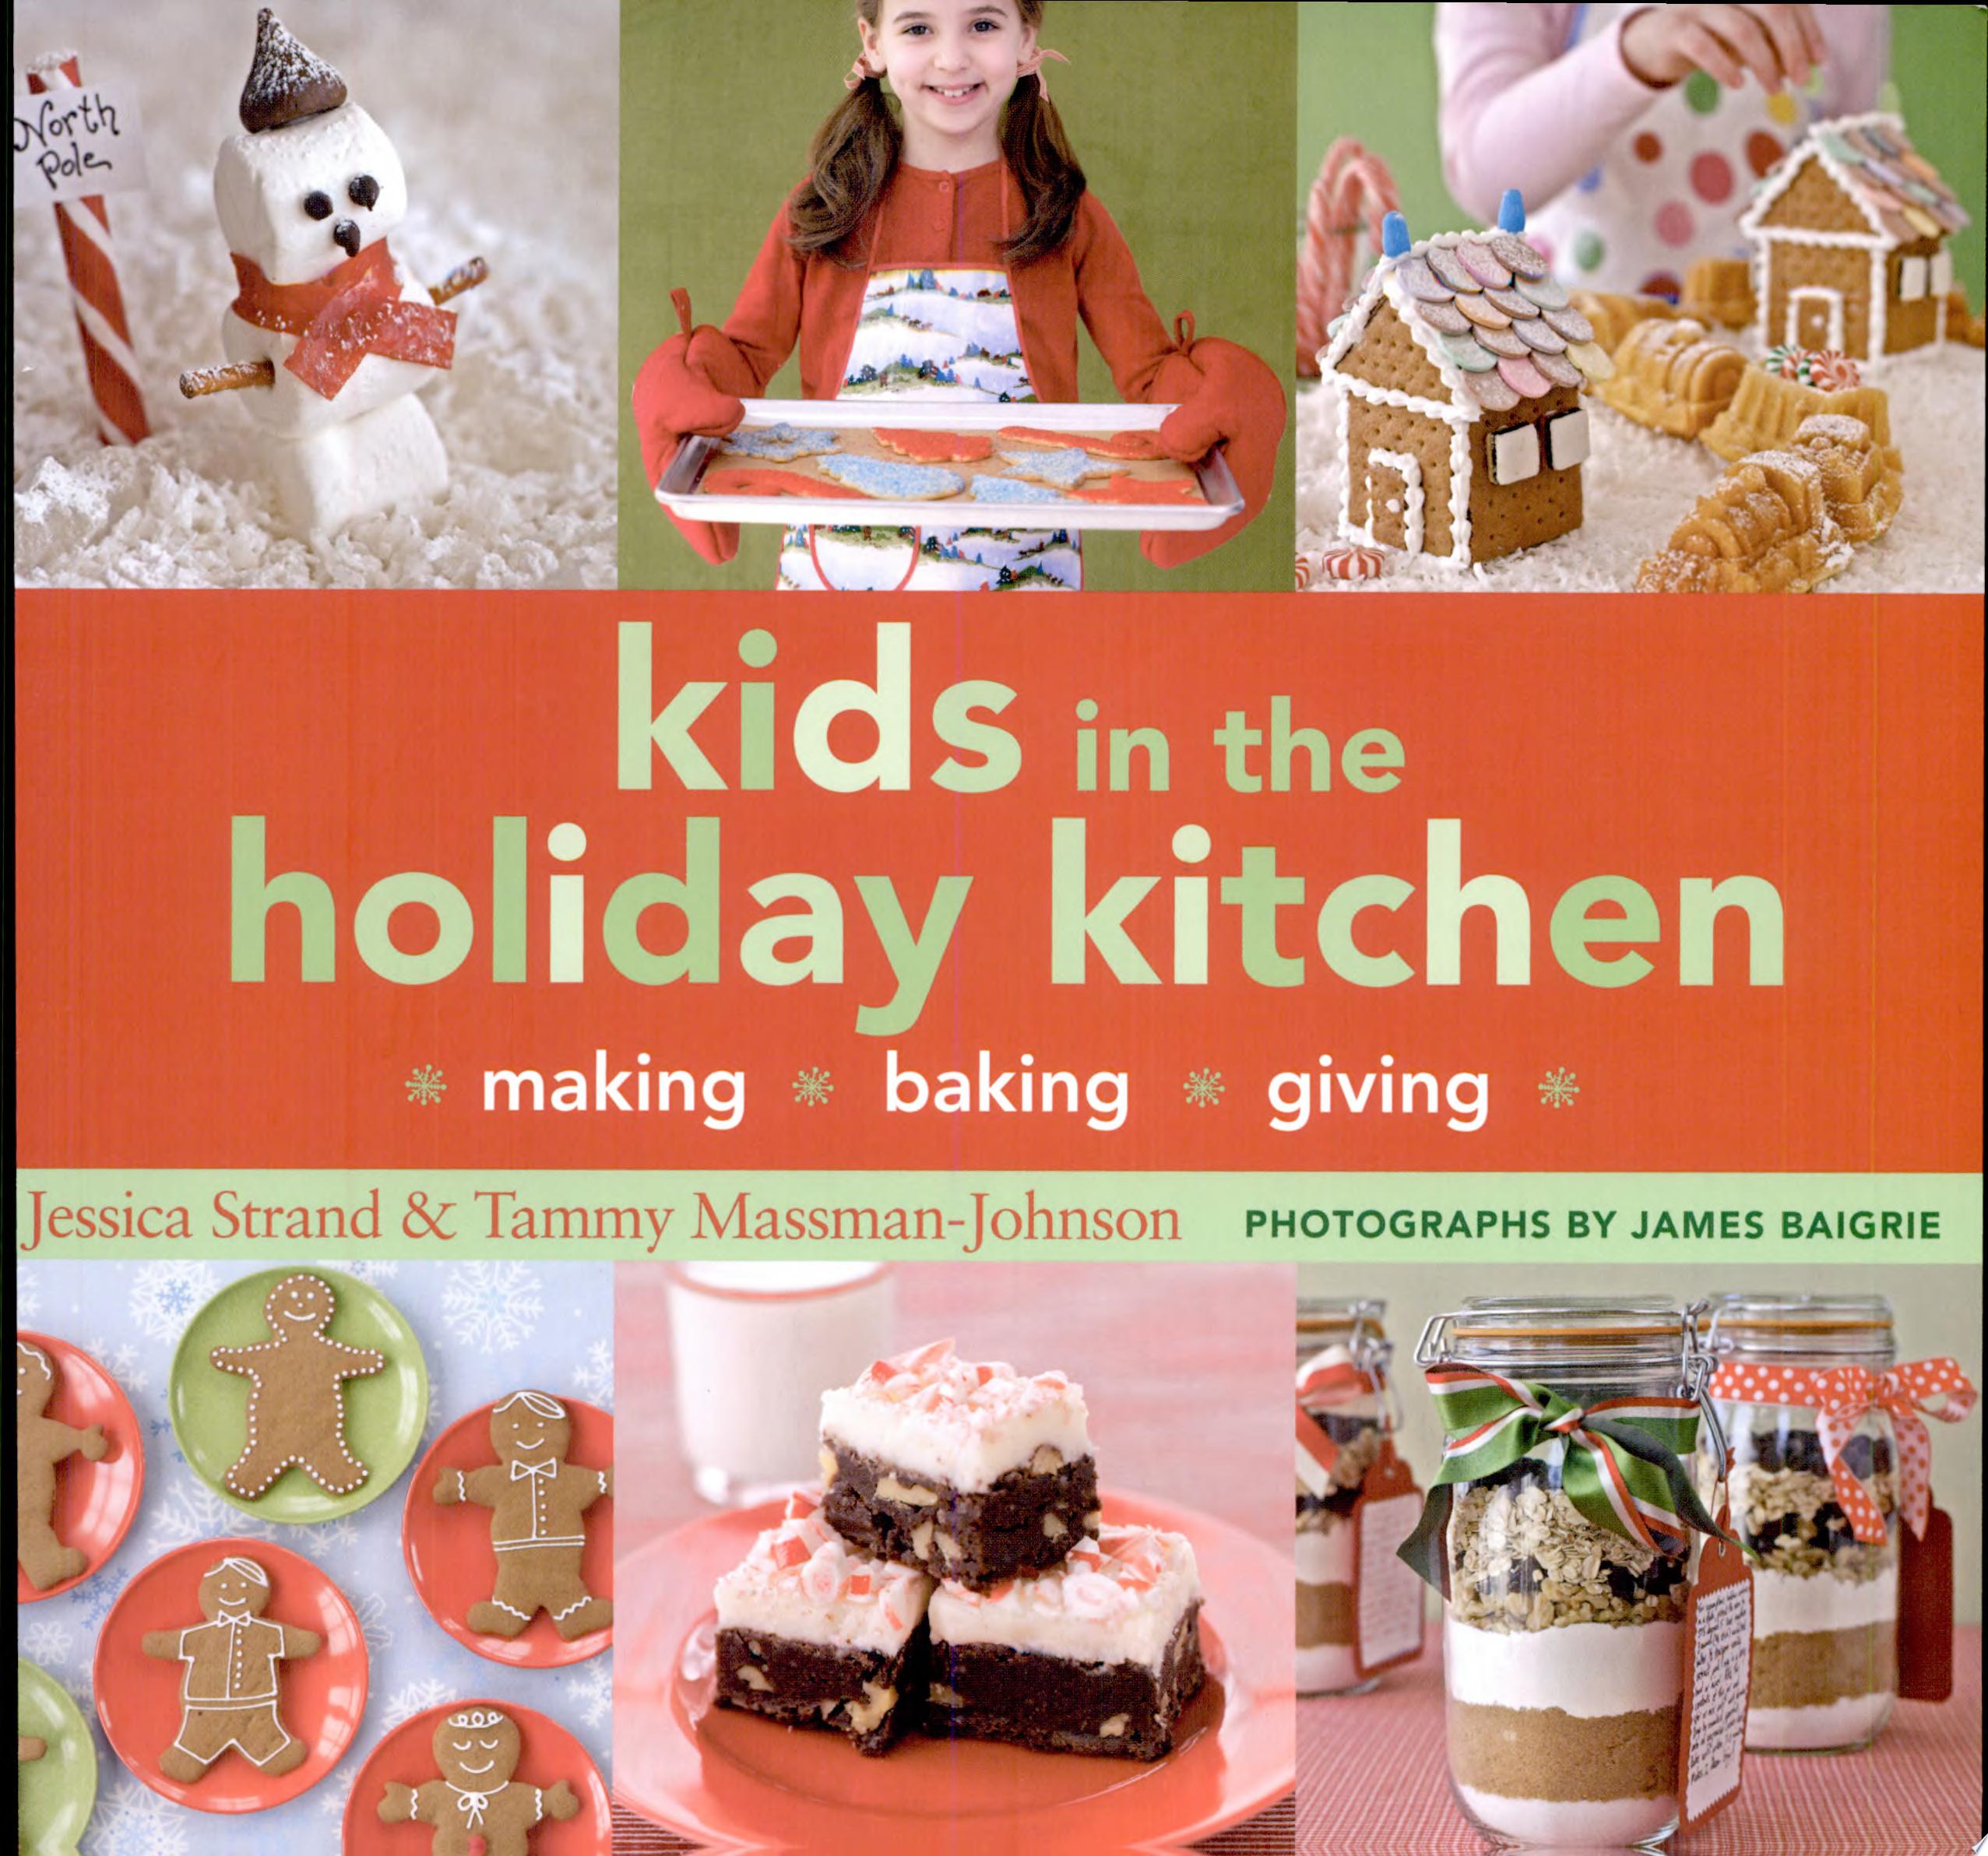 Image for "Kids in the Holiday Kitchen"